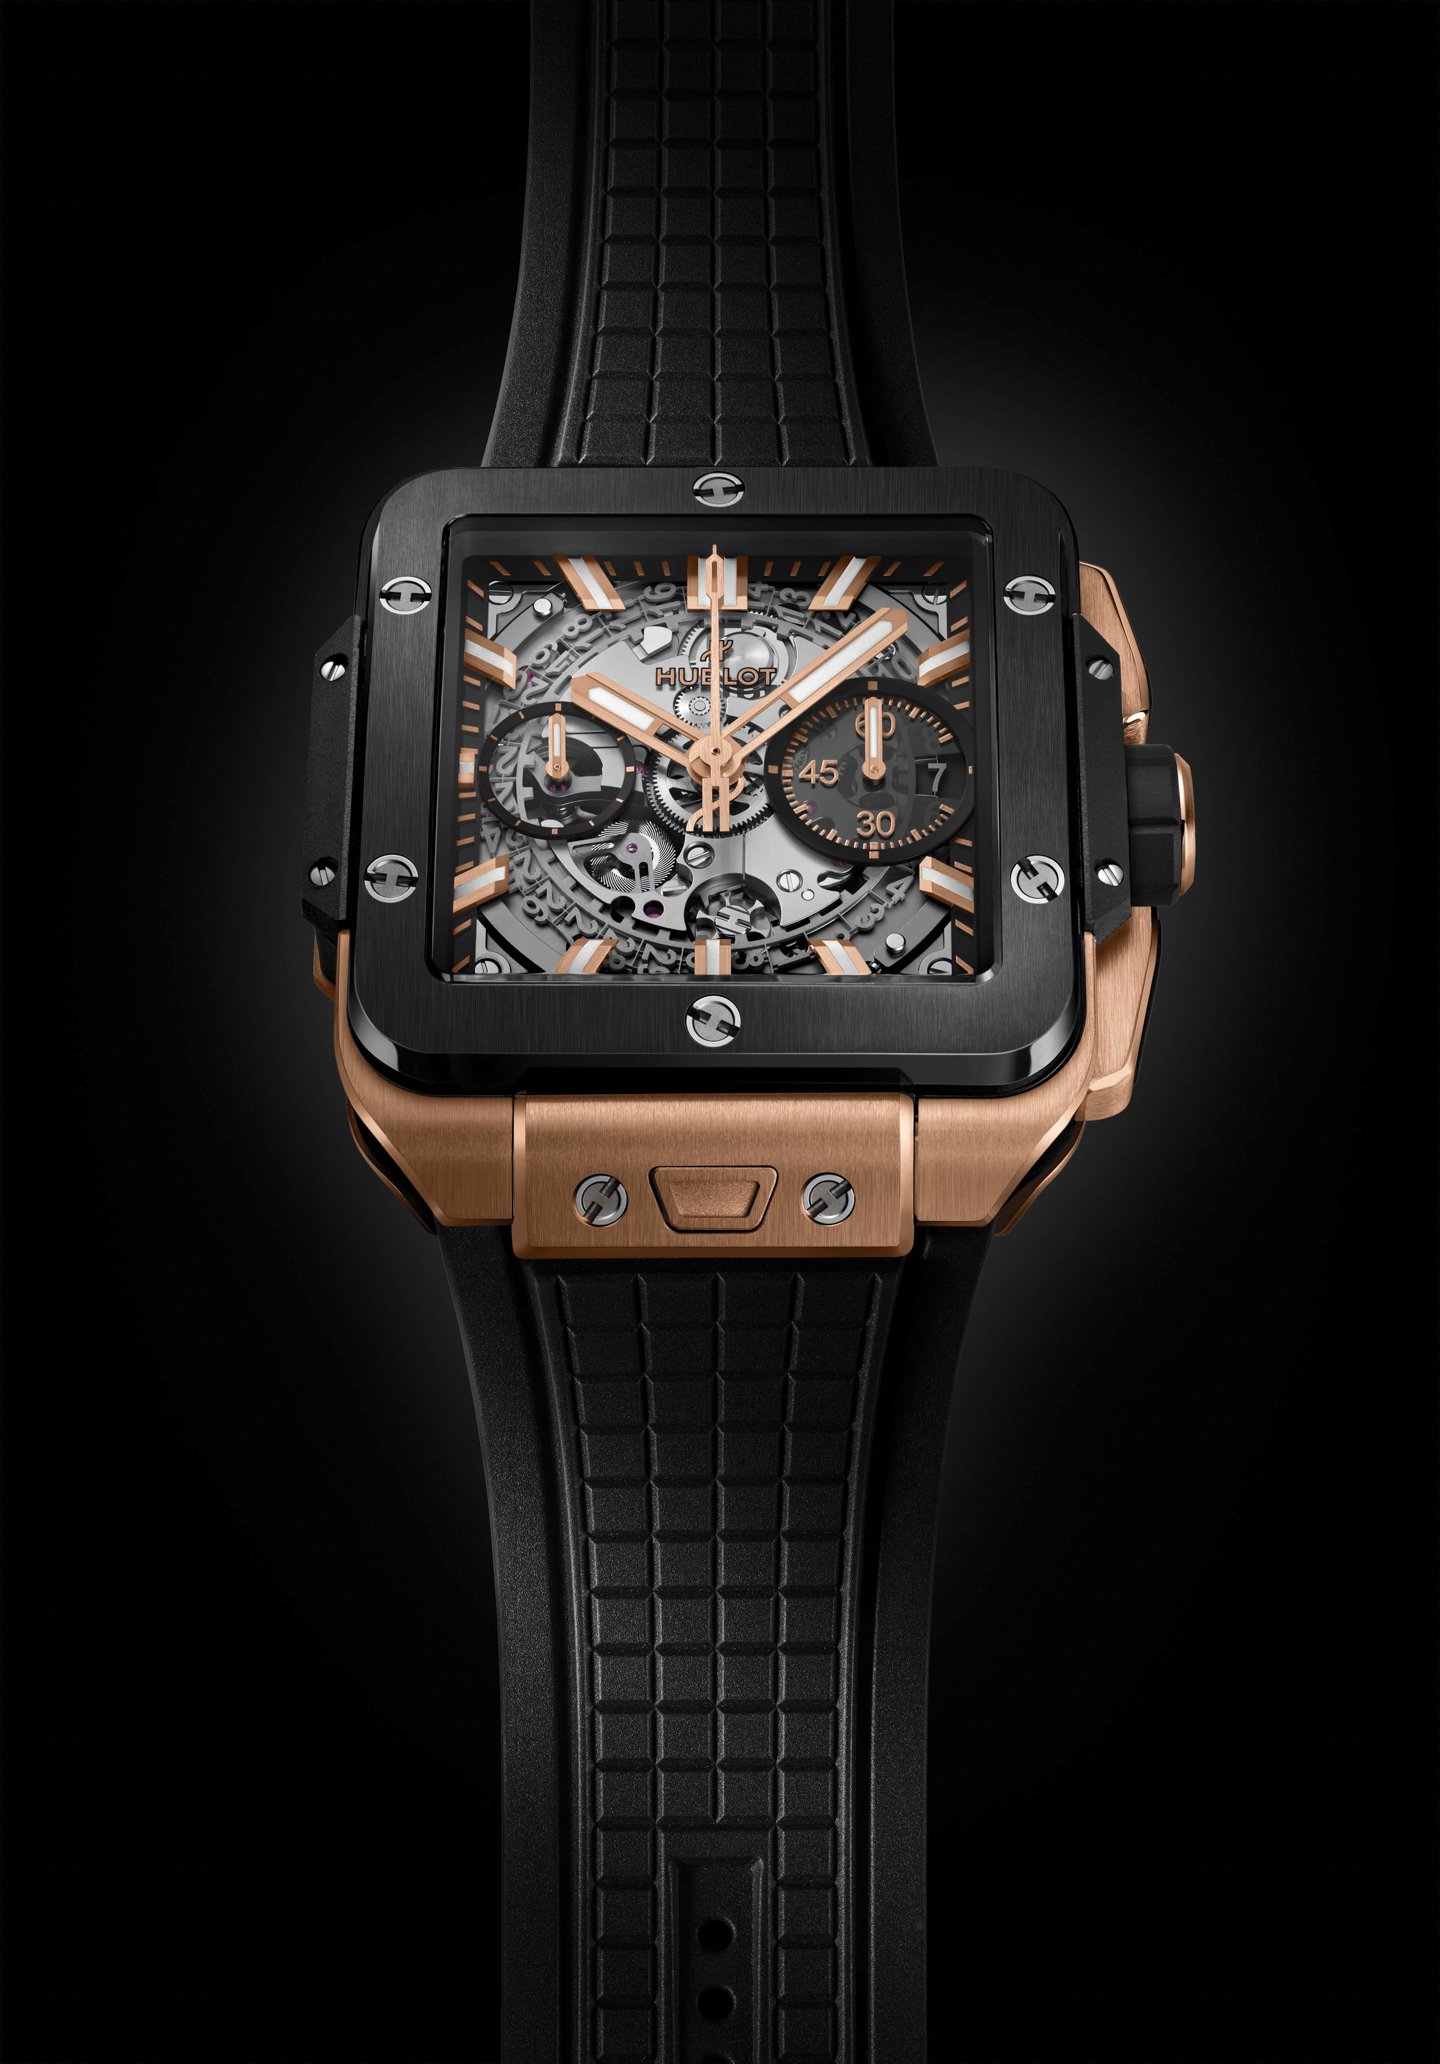 Hublot Makes It Hip To Be Square In 2022 - Watches of Switzerland